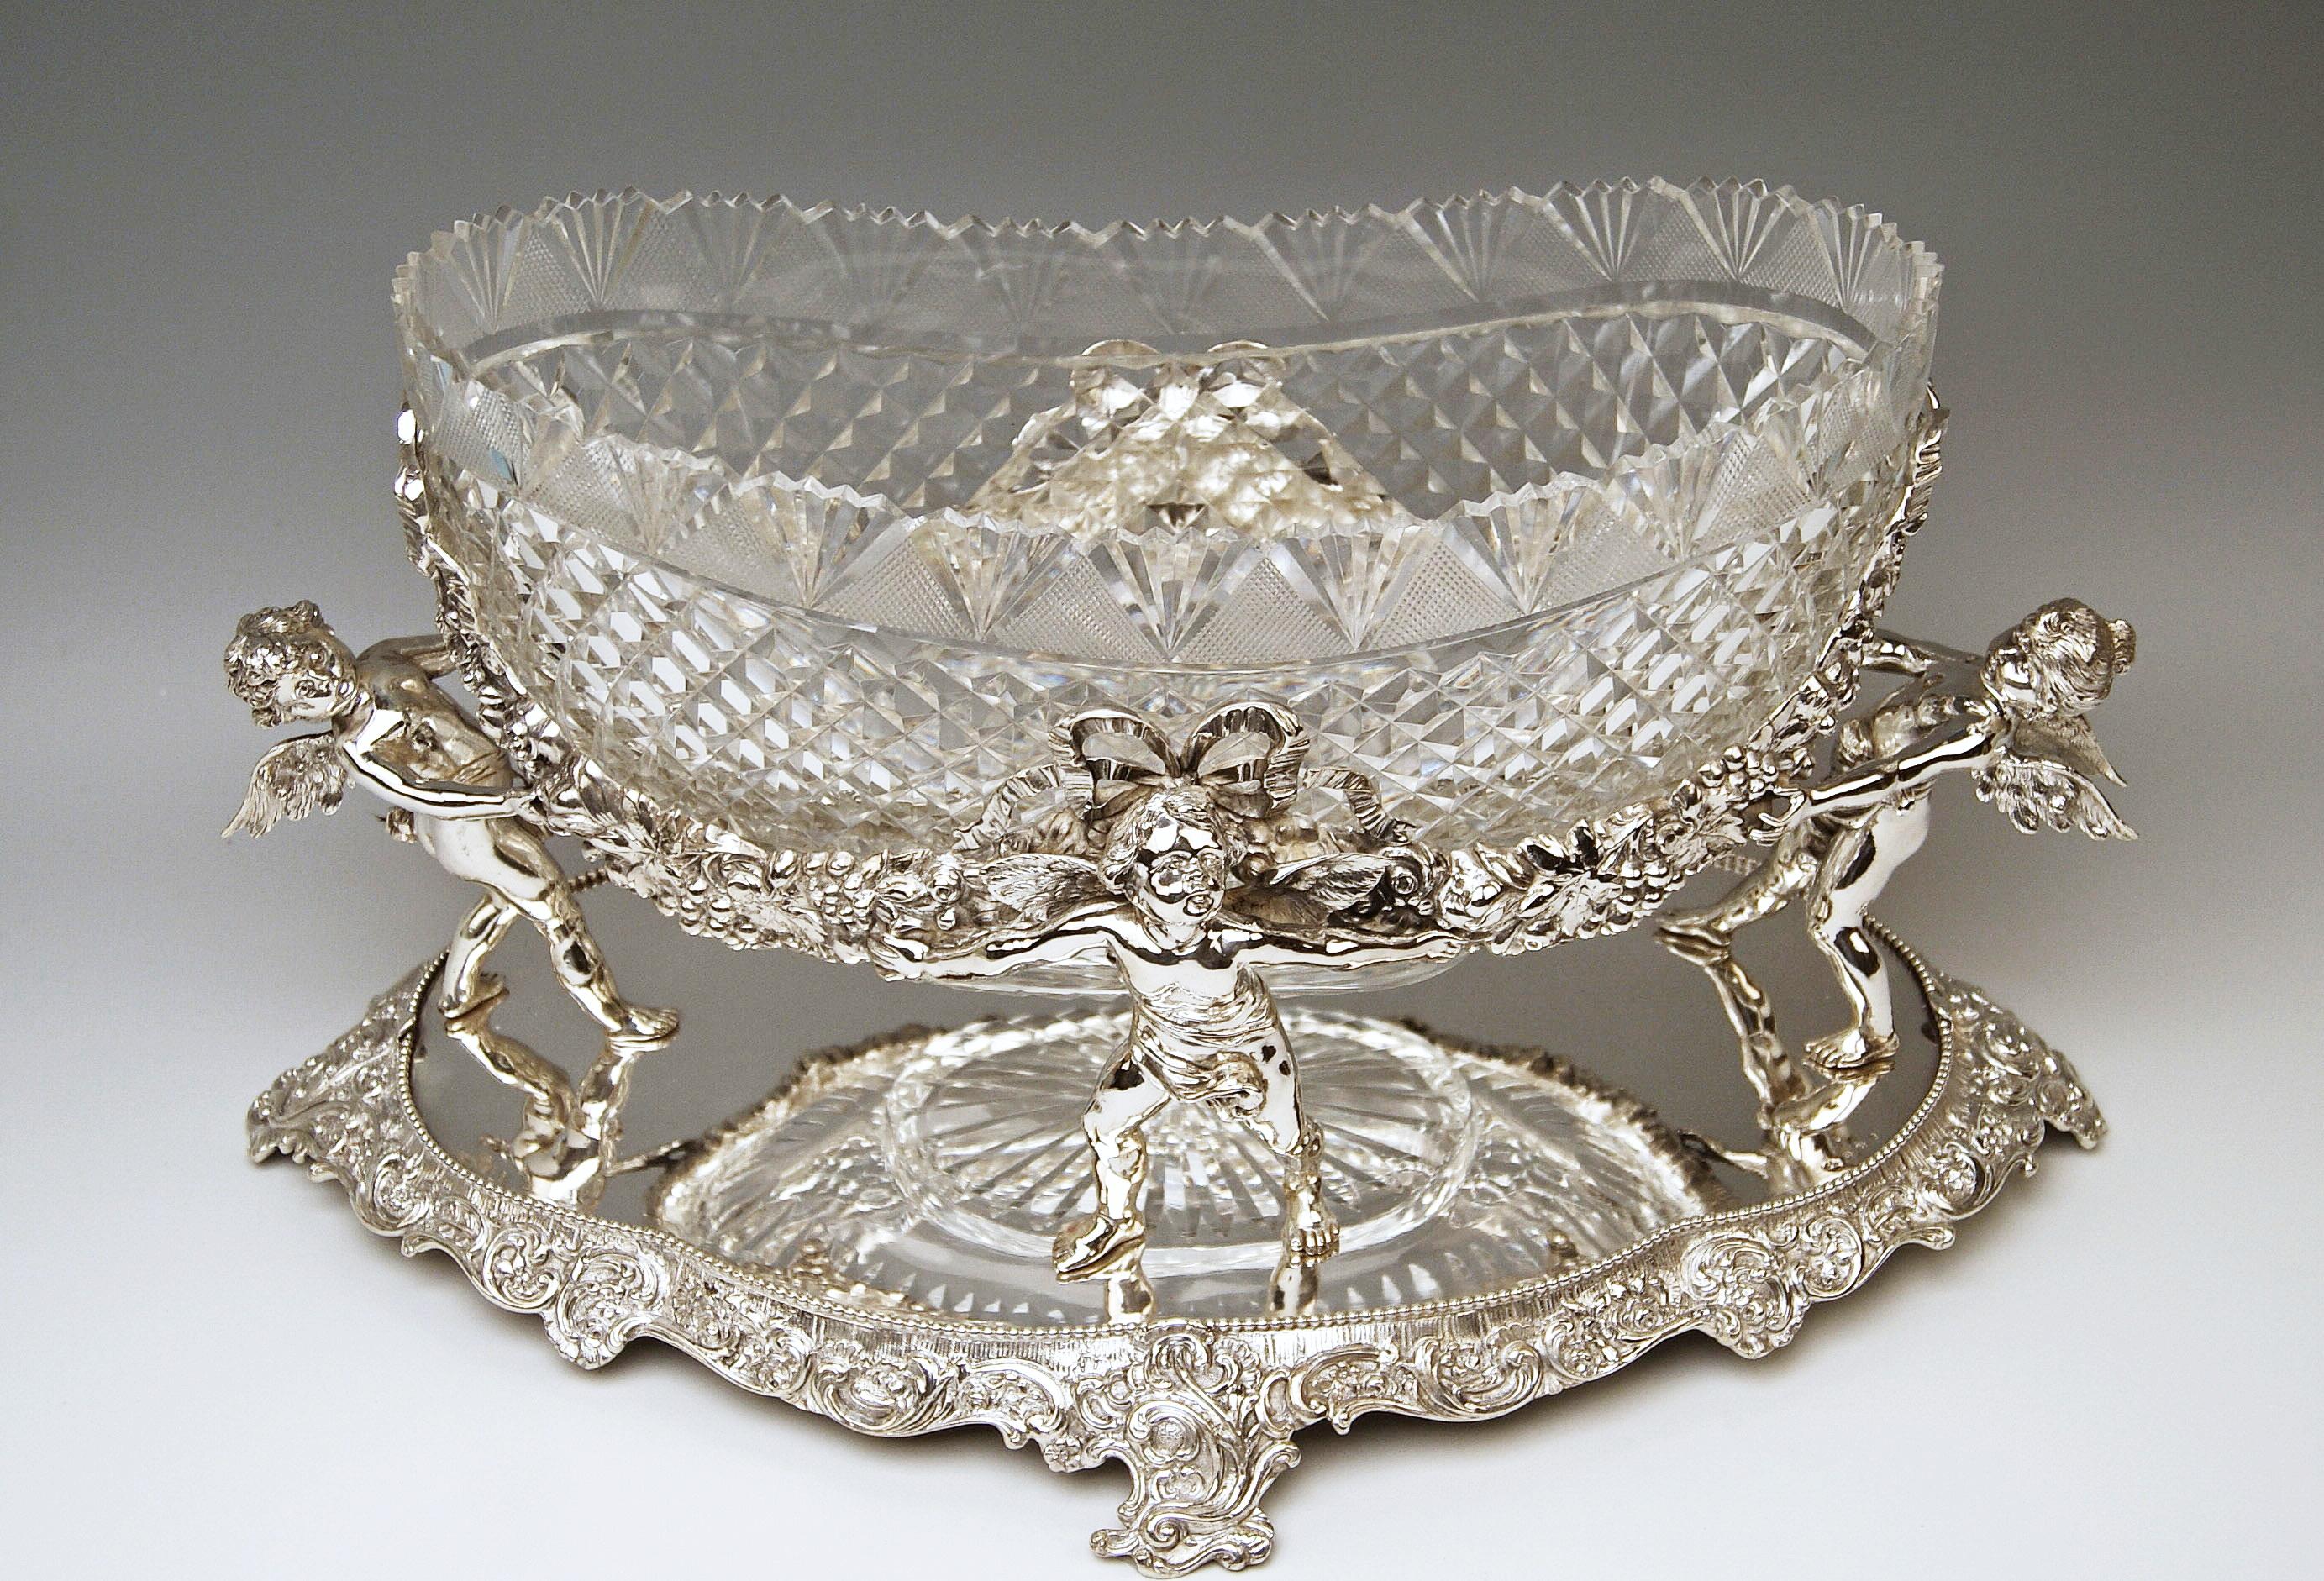 Silver German huge flower bowl / centrepiece with original gorgeous glass liner
Measures: c (18.30 inches) 

Style of Historicism / Neo-Baroque (made circa 1888-1890)

Silver 800
branded by German Crescent with crown (used as from the year 1888 as